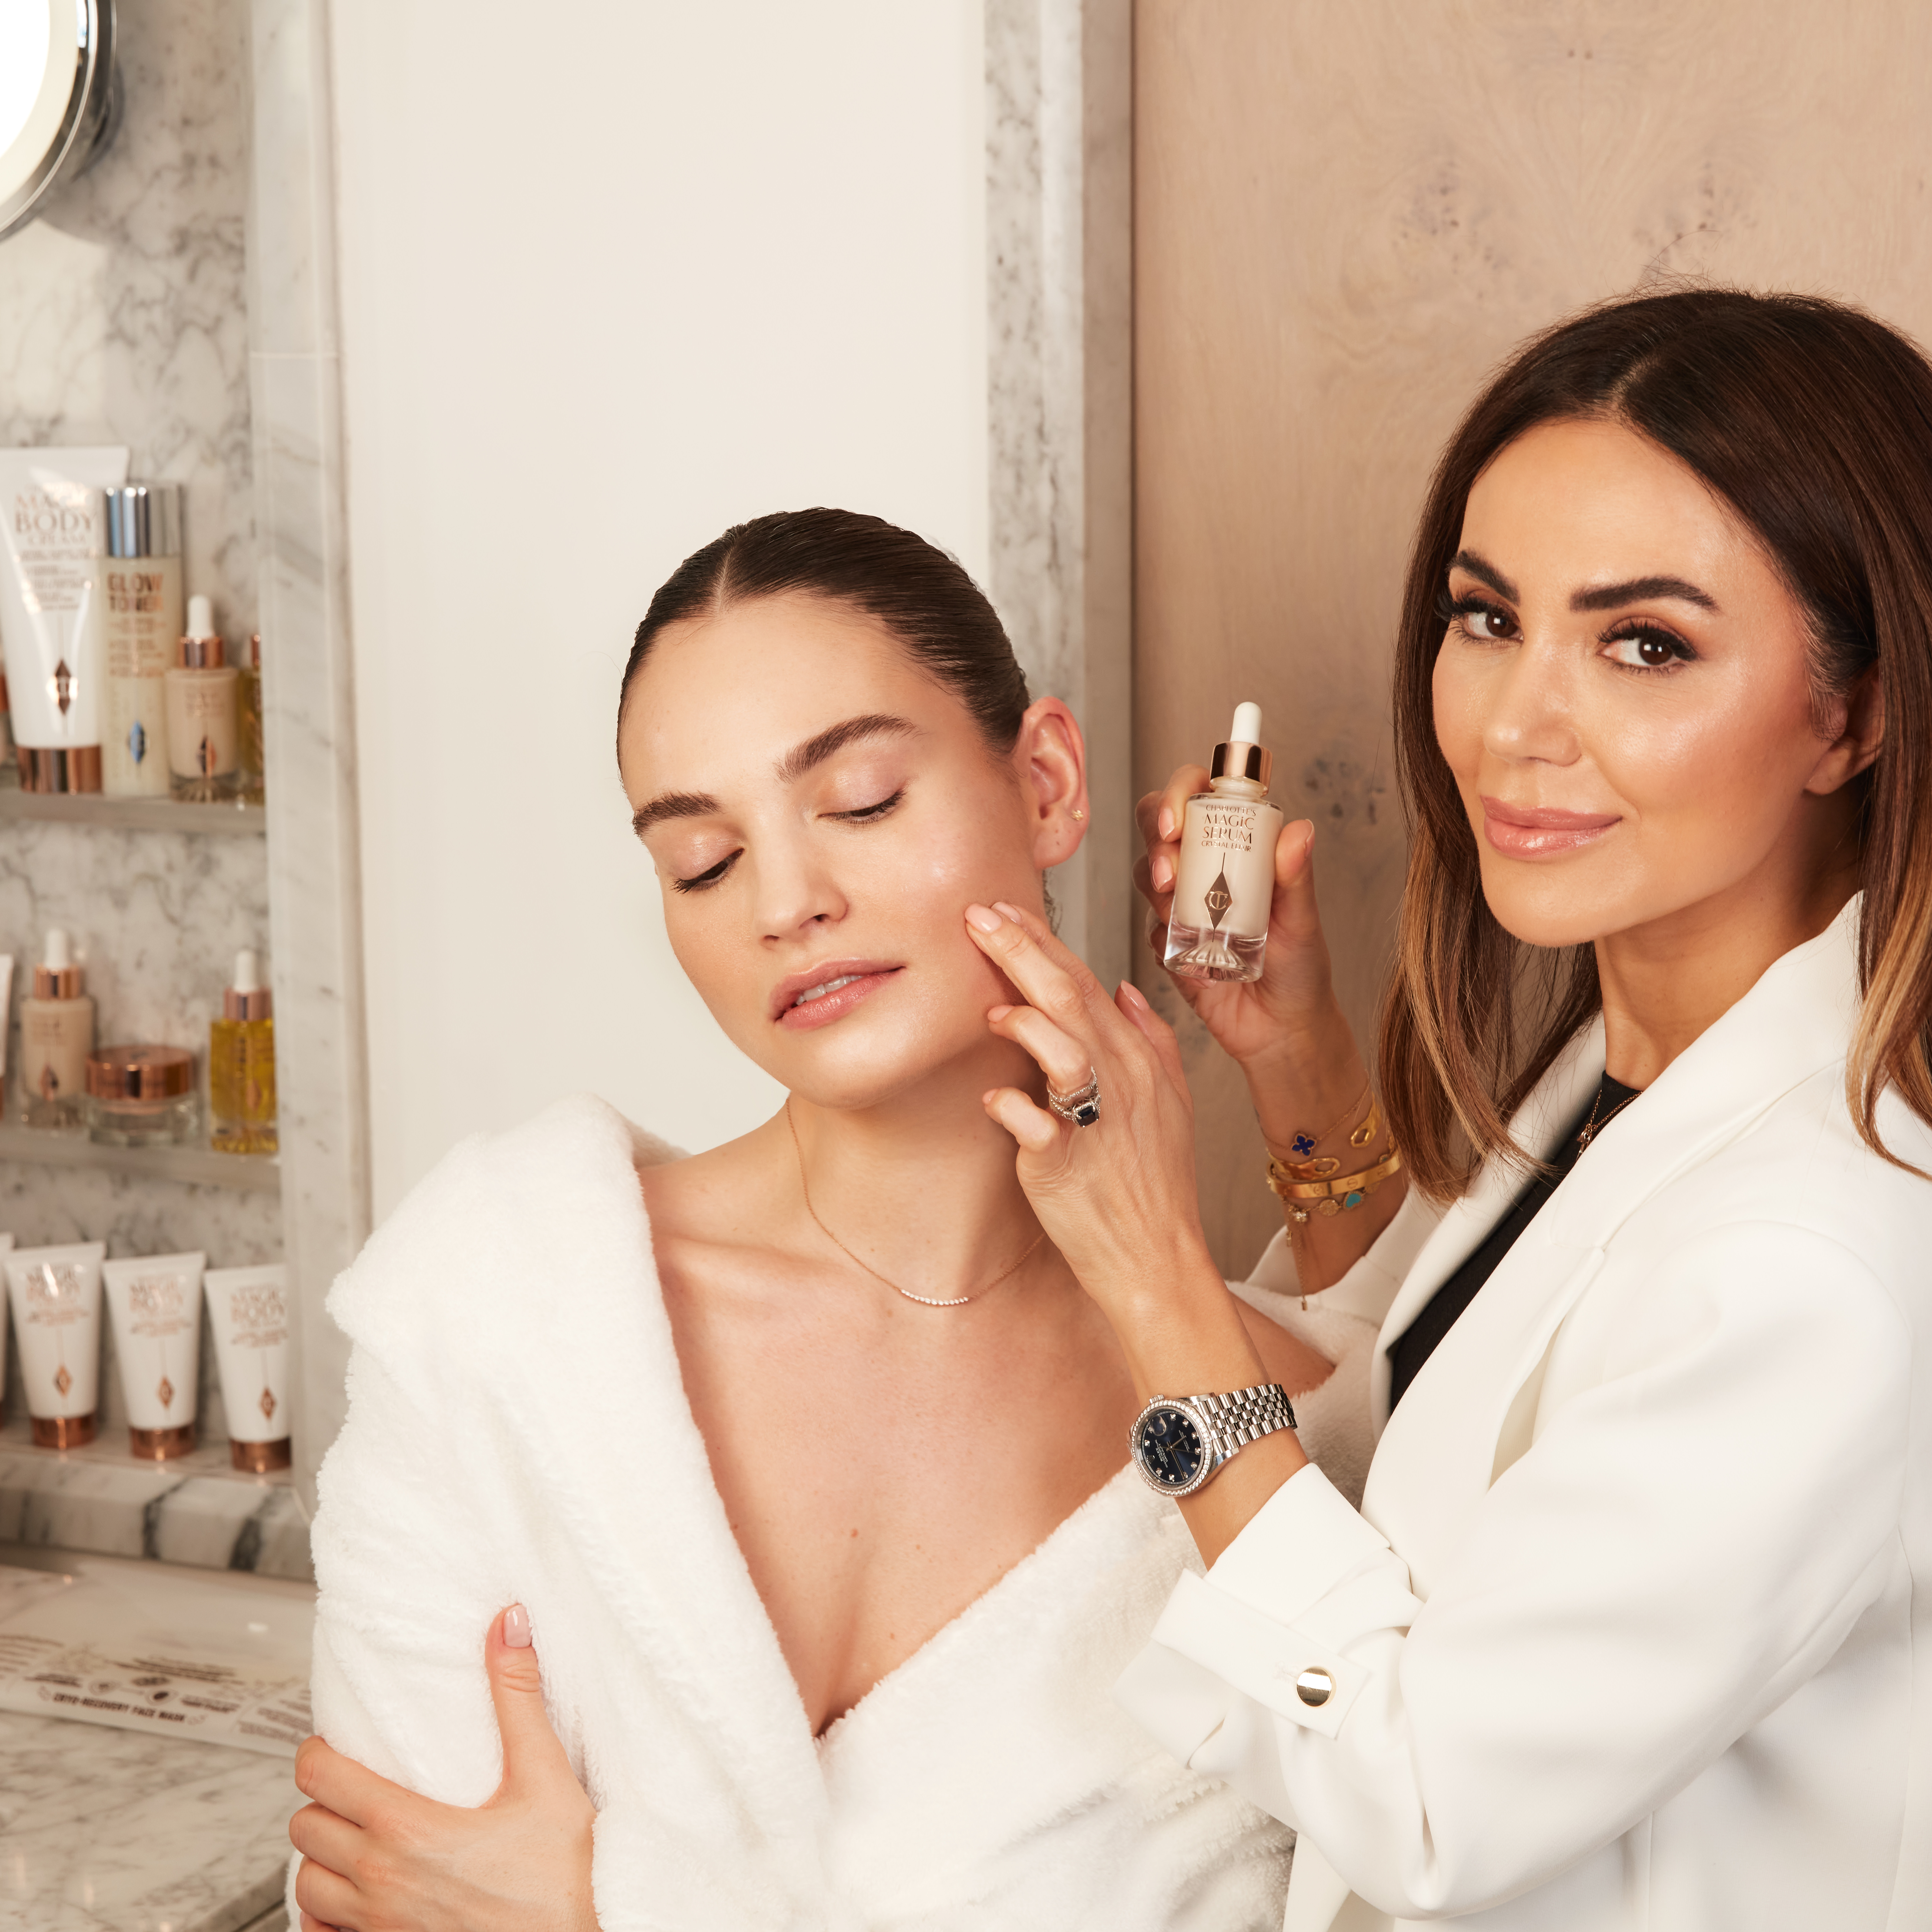 Dermatologist demonstrating how to apply face serum on British actress Lily James